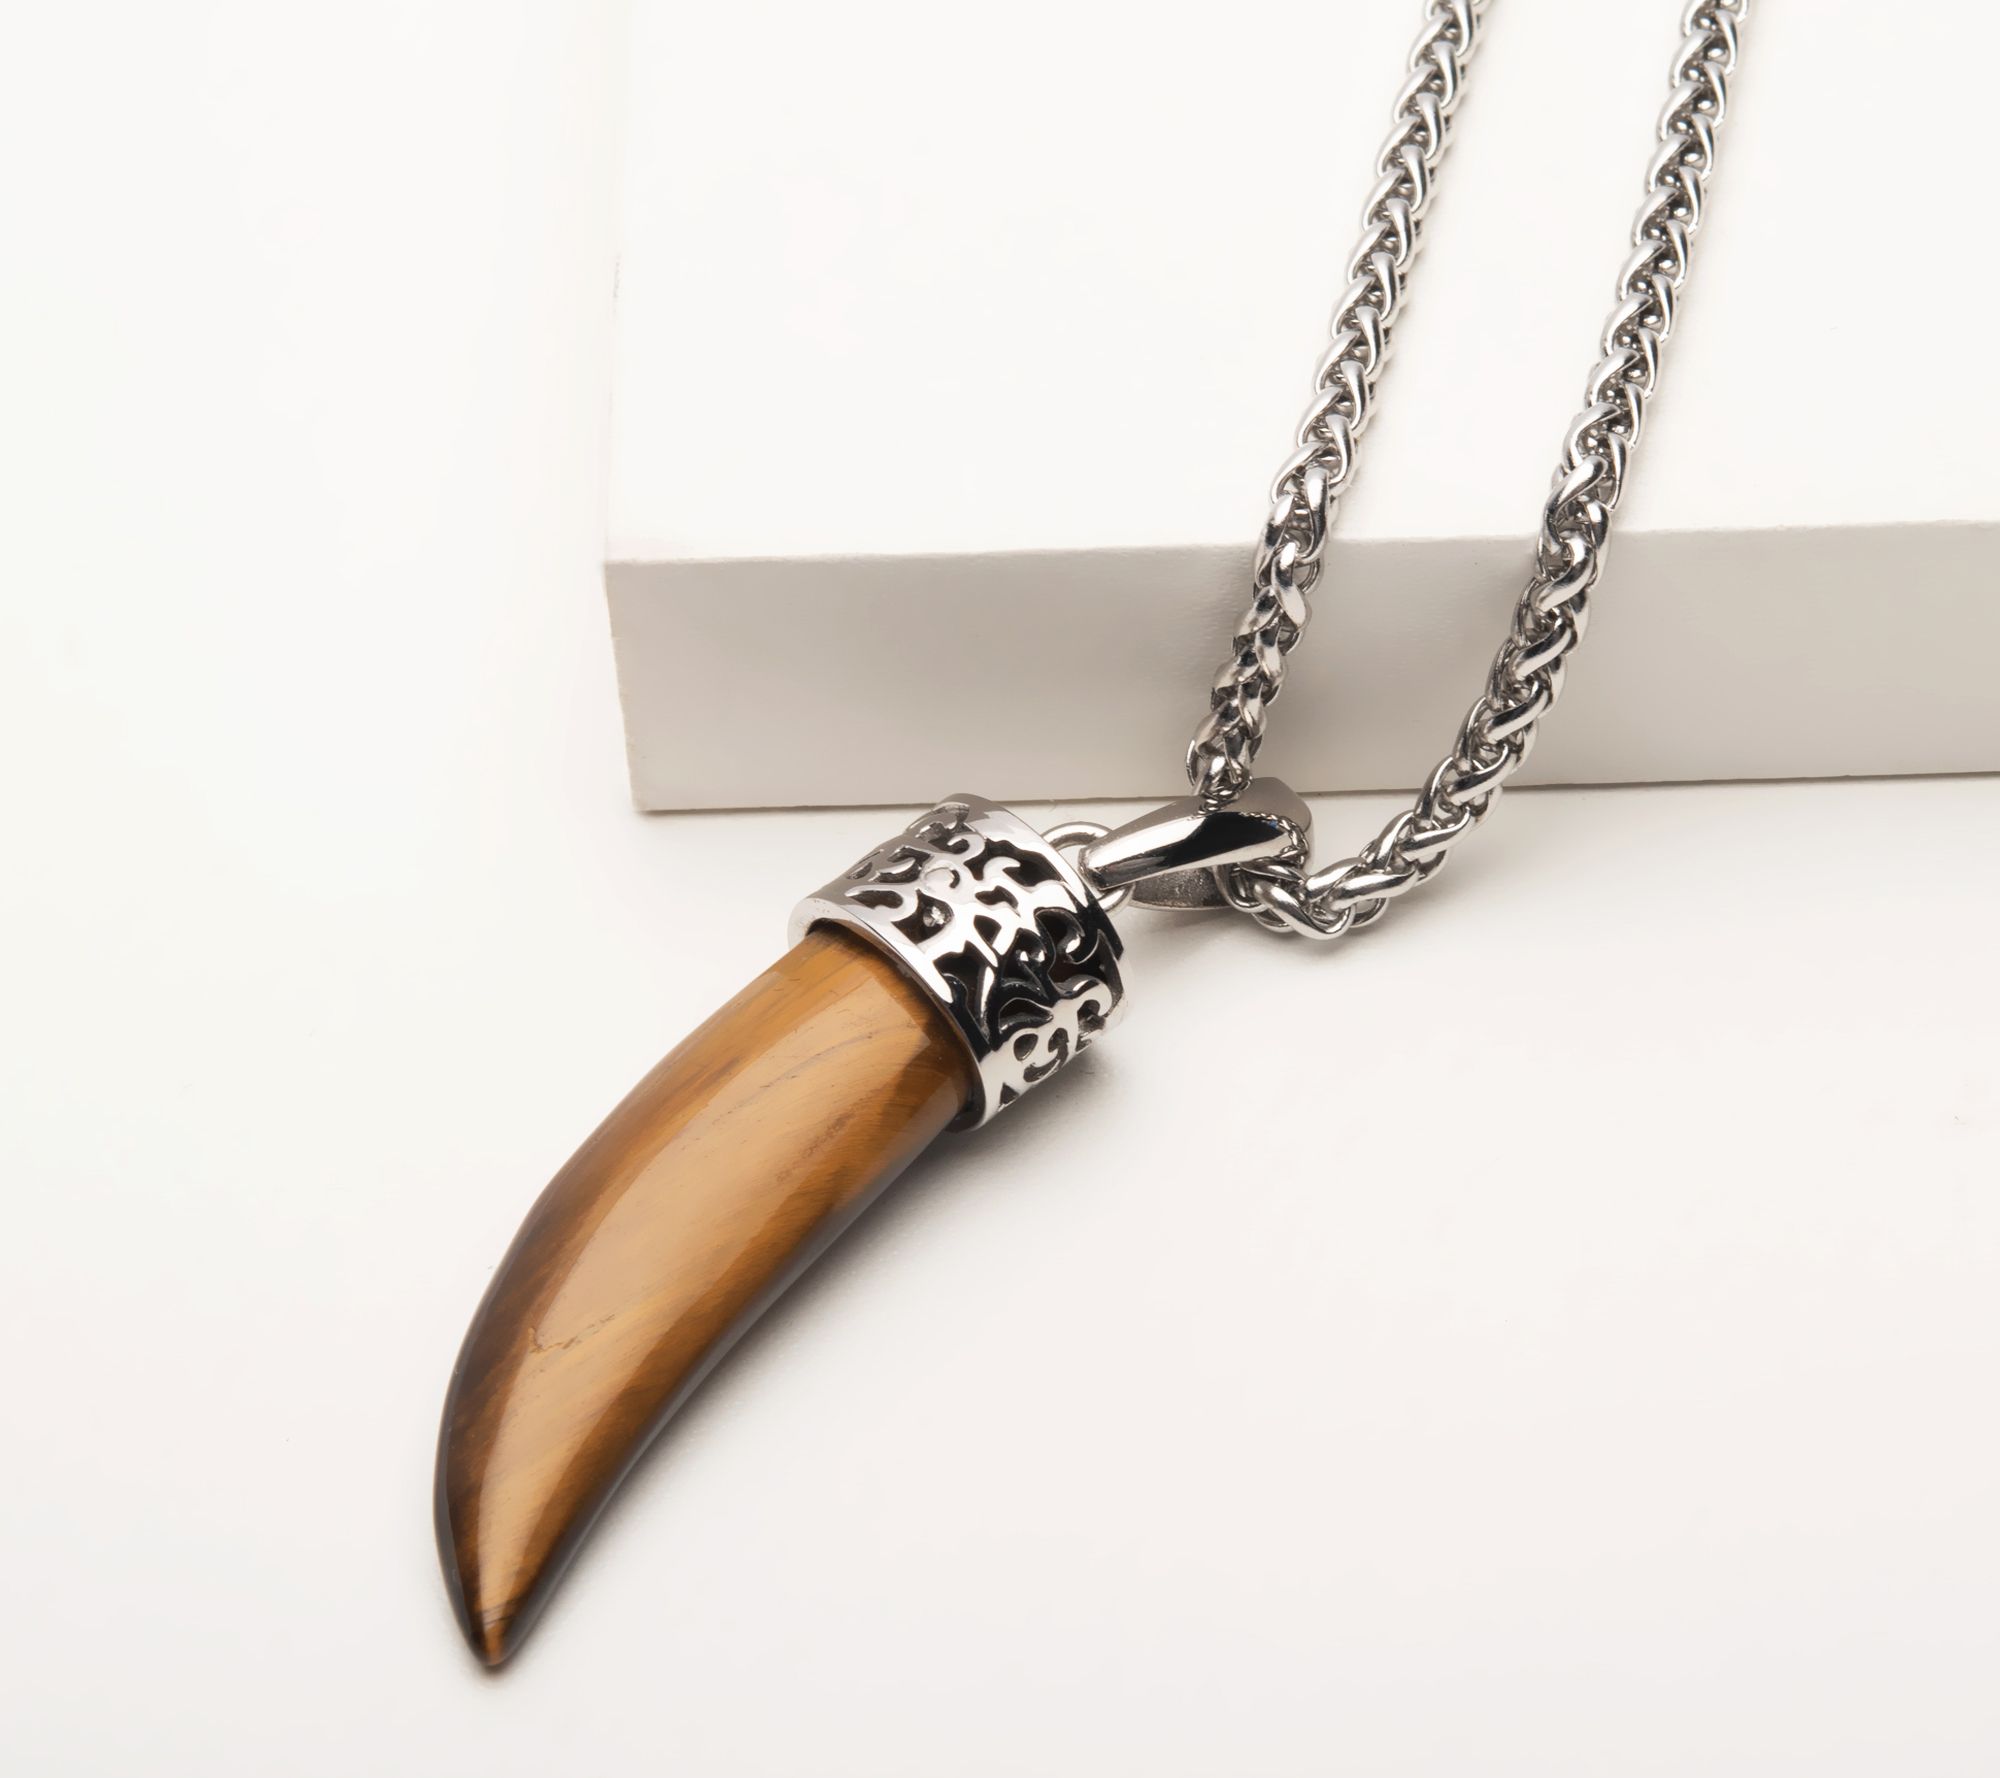 The Tiger Claw Pendant